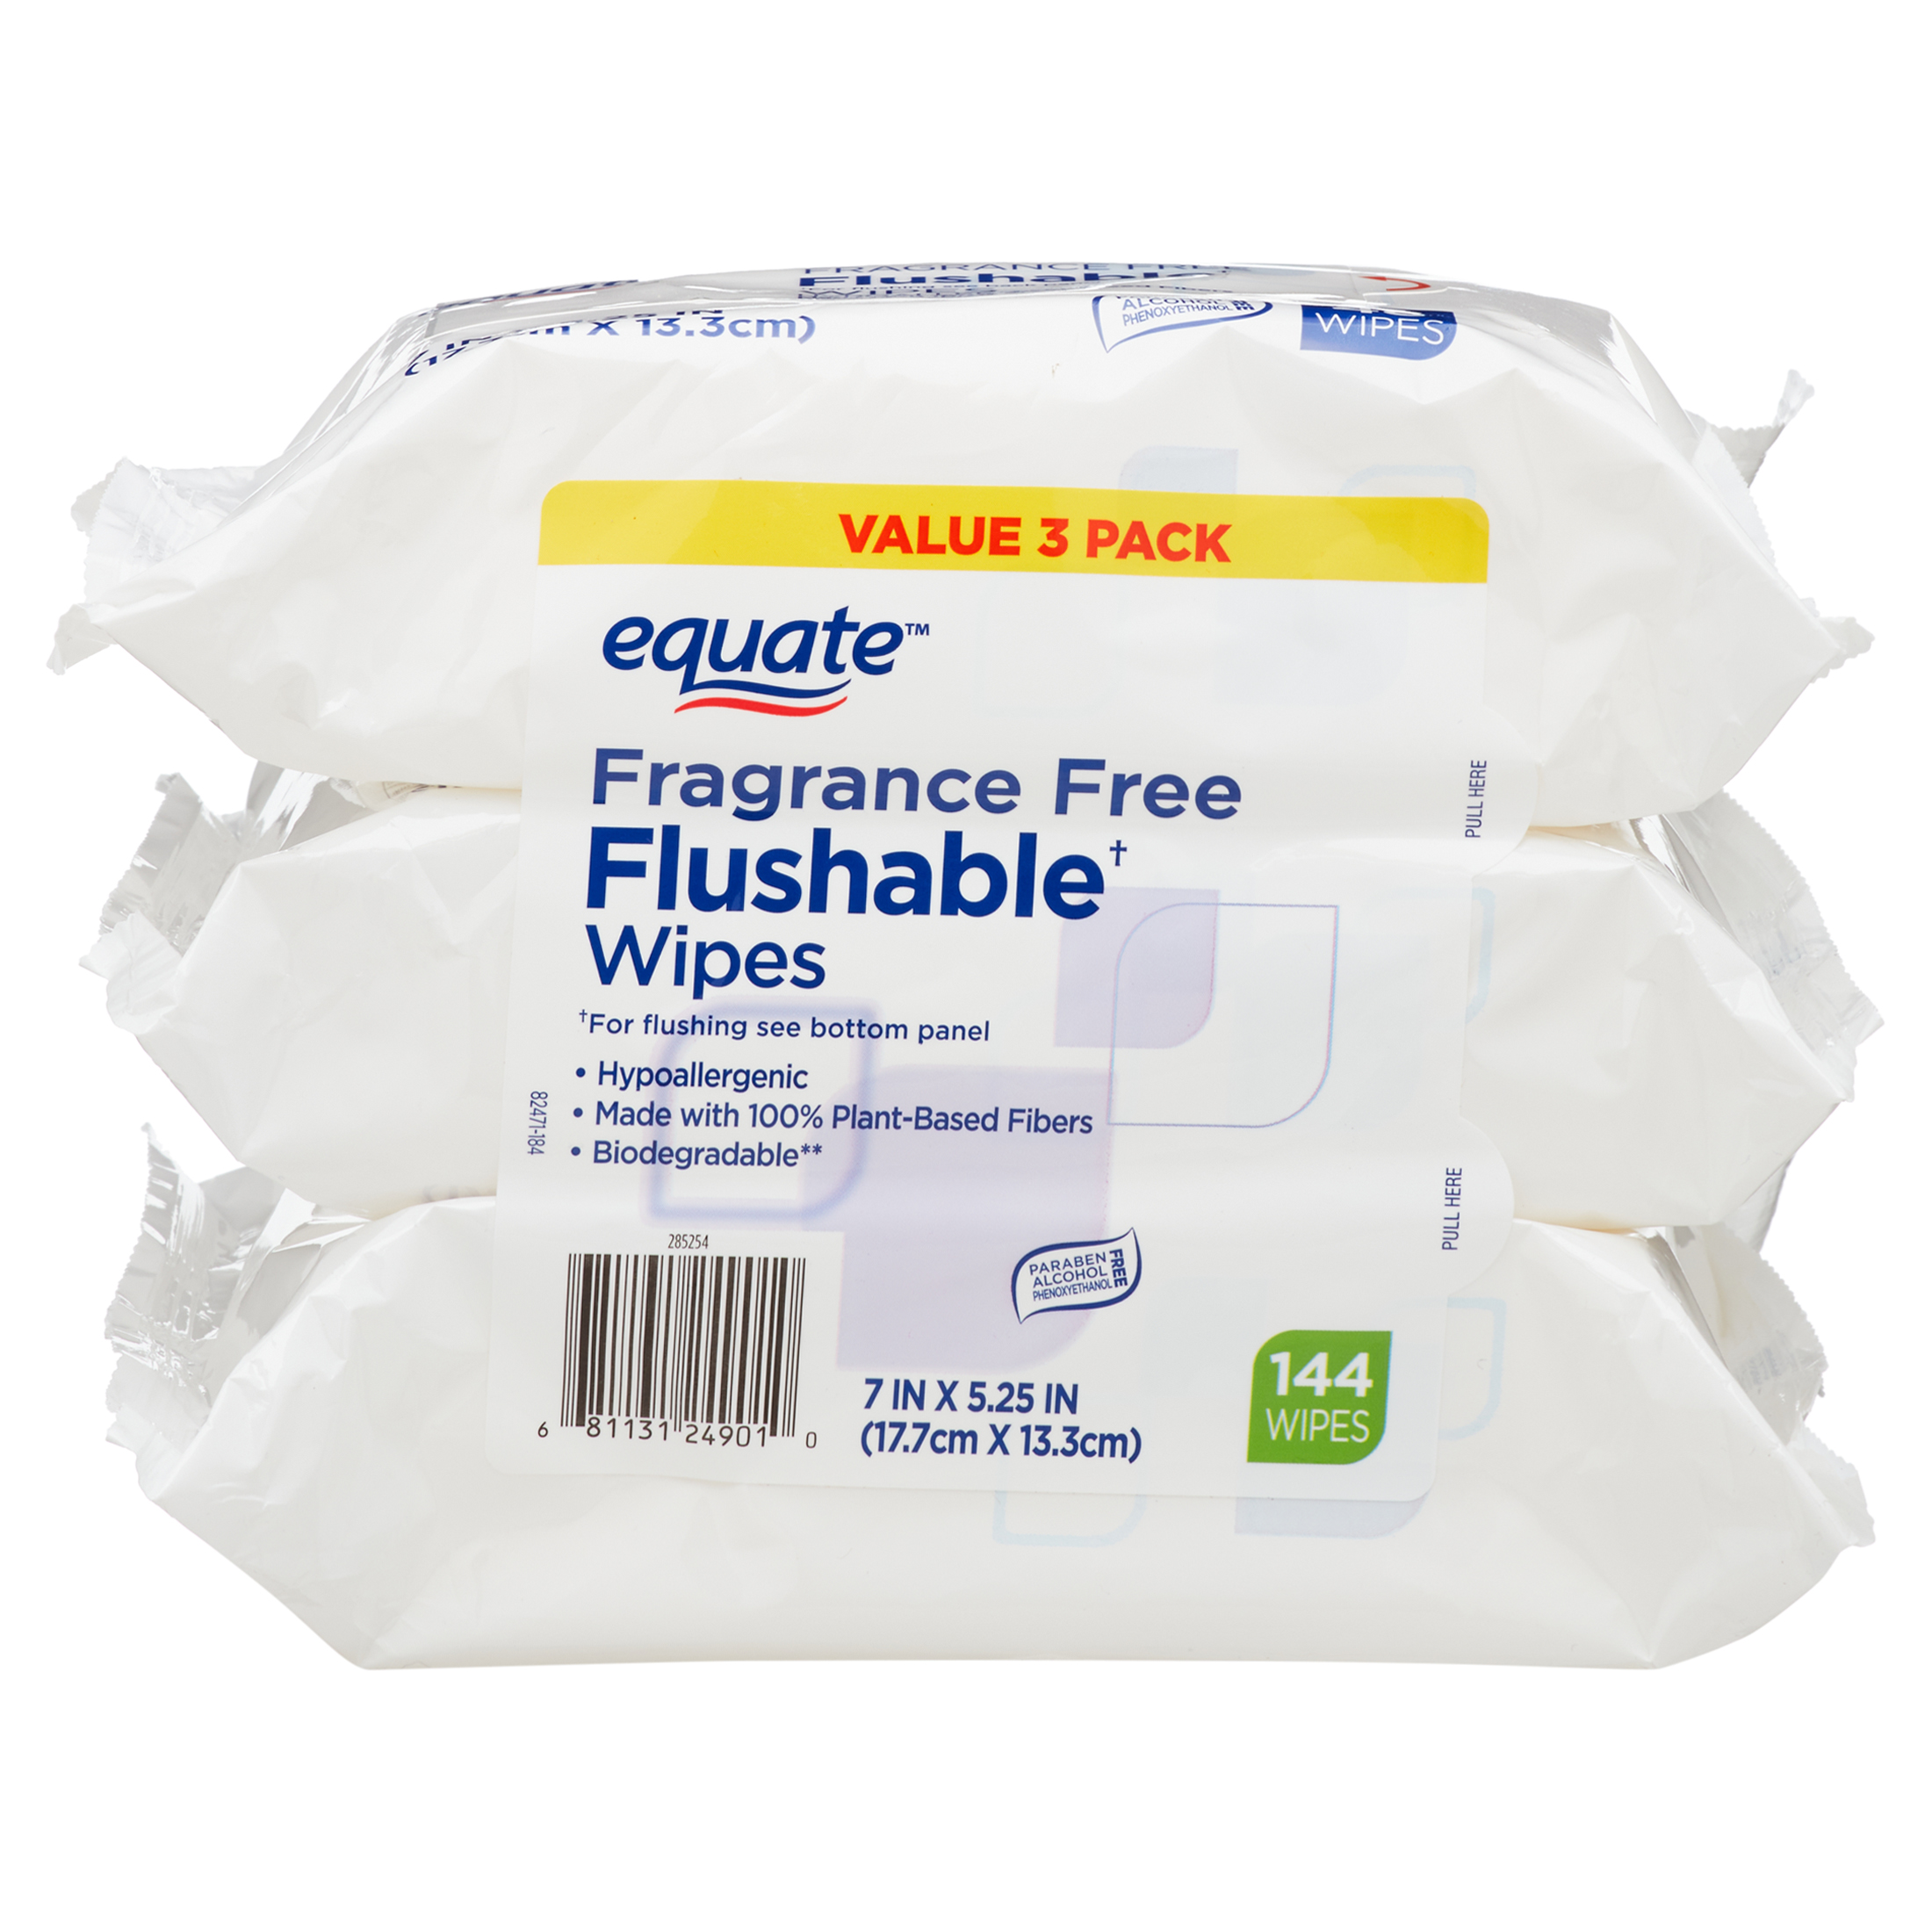 Equate Fragrance Free Flushable Wipes, 3 Resealable Packs (144 Total Wipes) - image 1 of 9